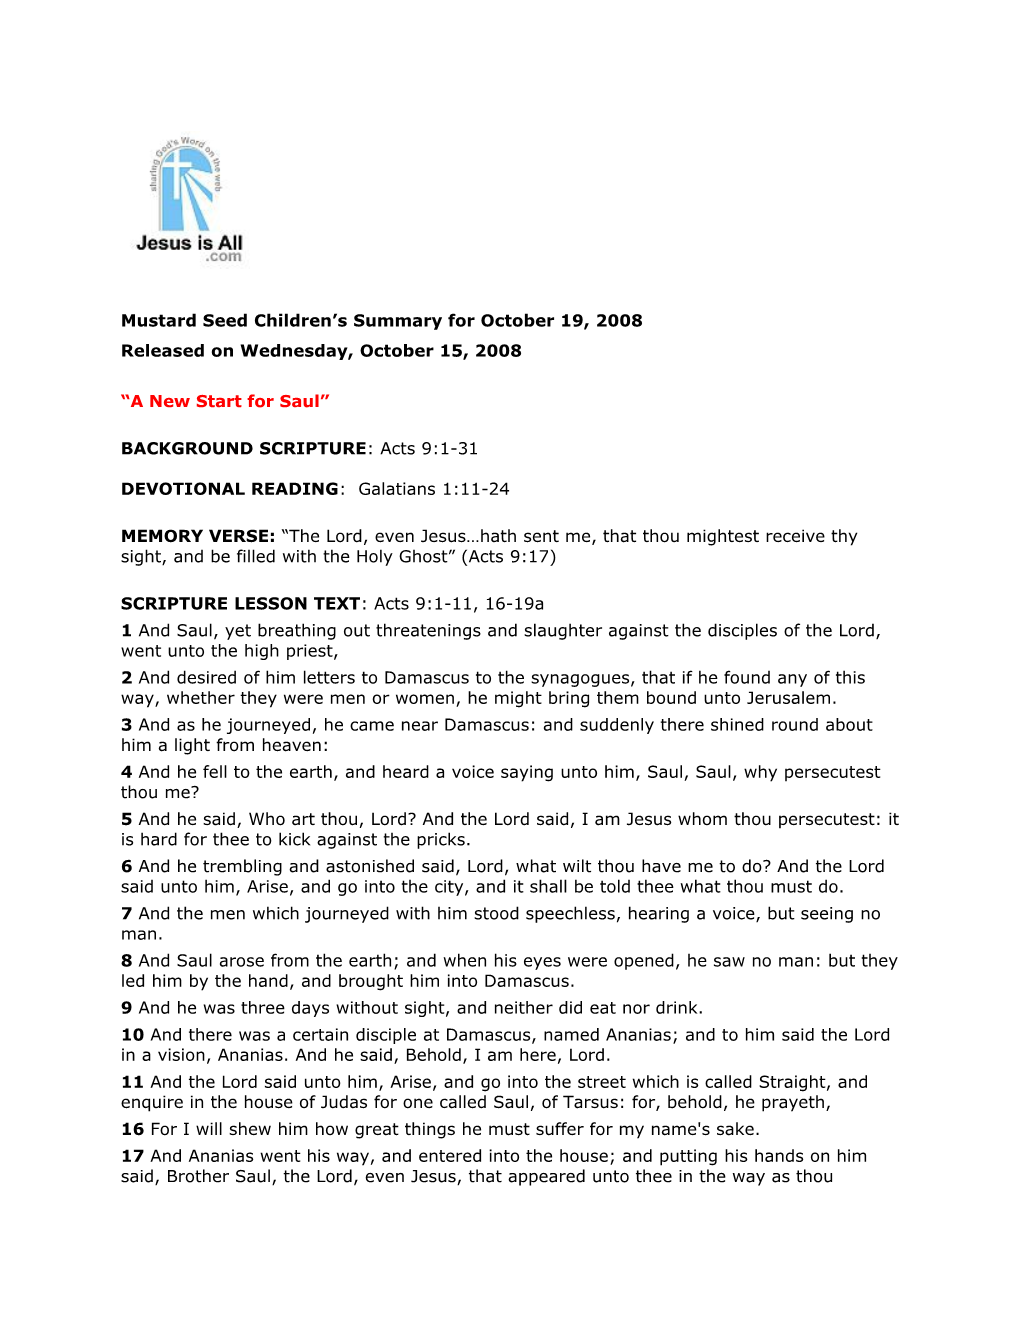 Adult Sunday School Lesson Summary for 28 September 2008